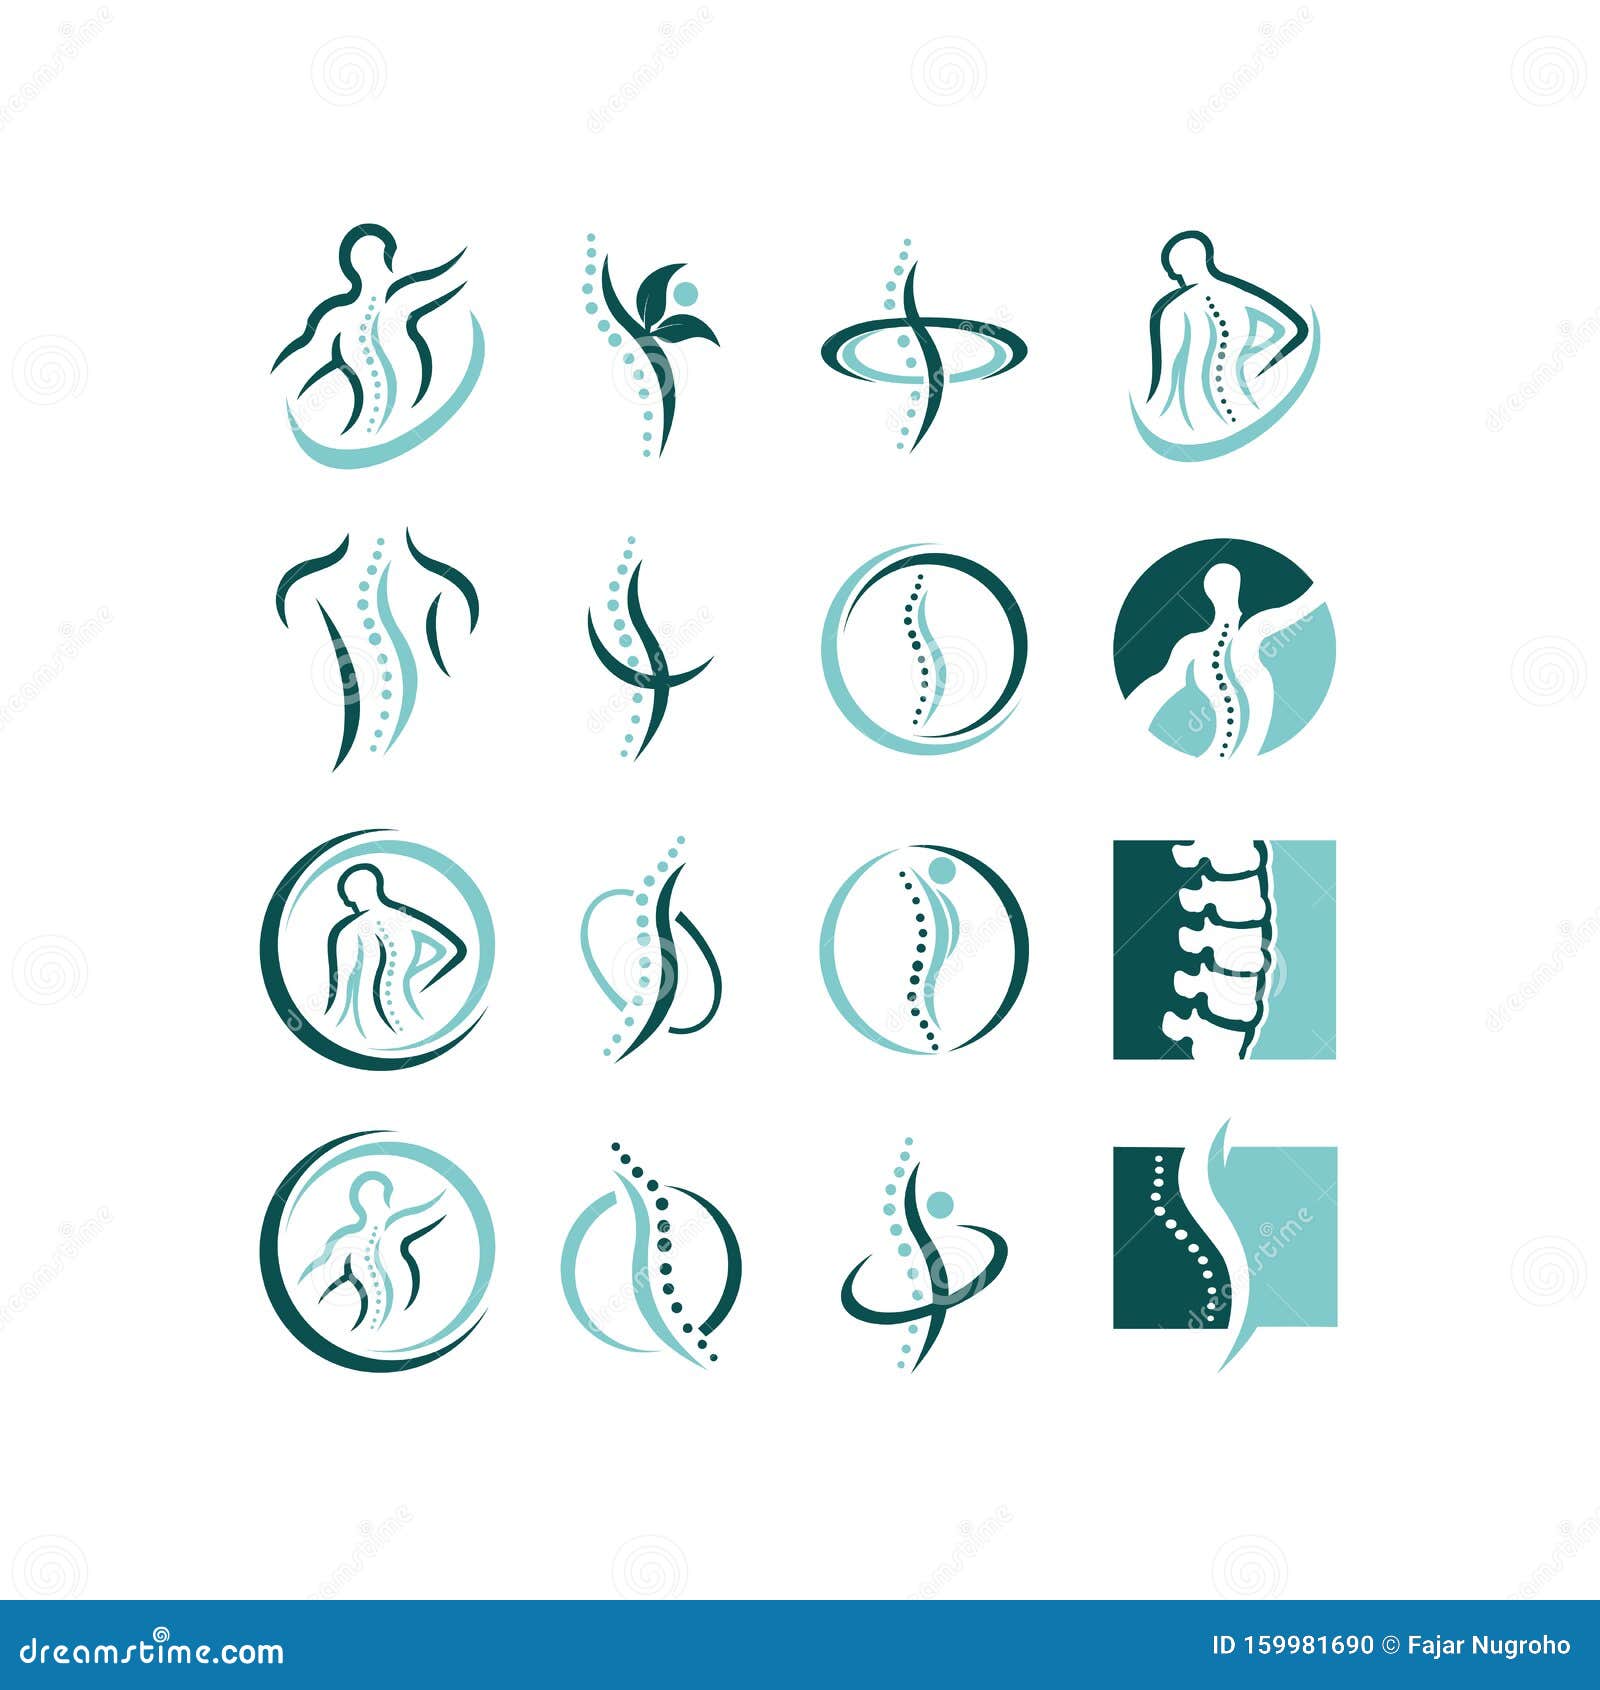 Chiropractic Spine Logo Chiropractic Medical Center Spine And